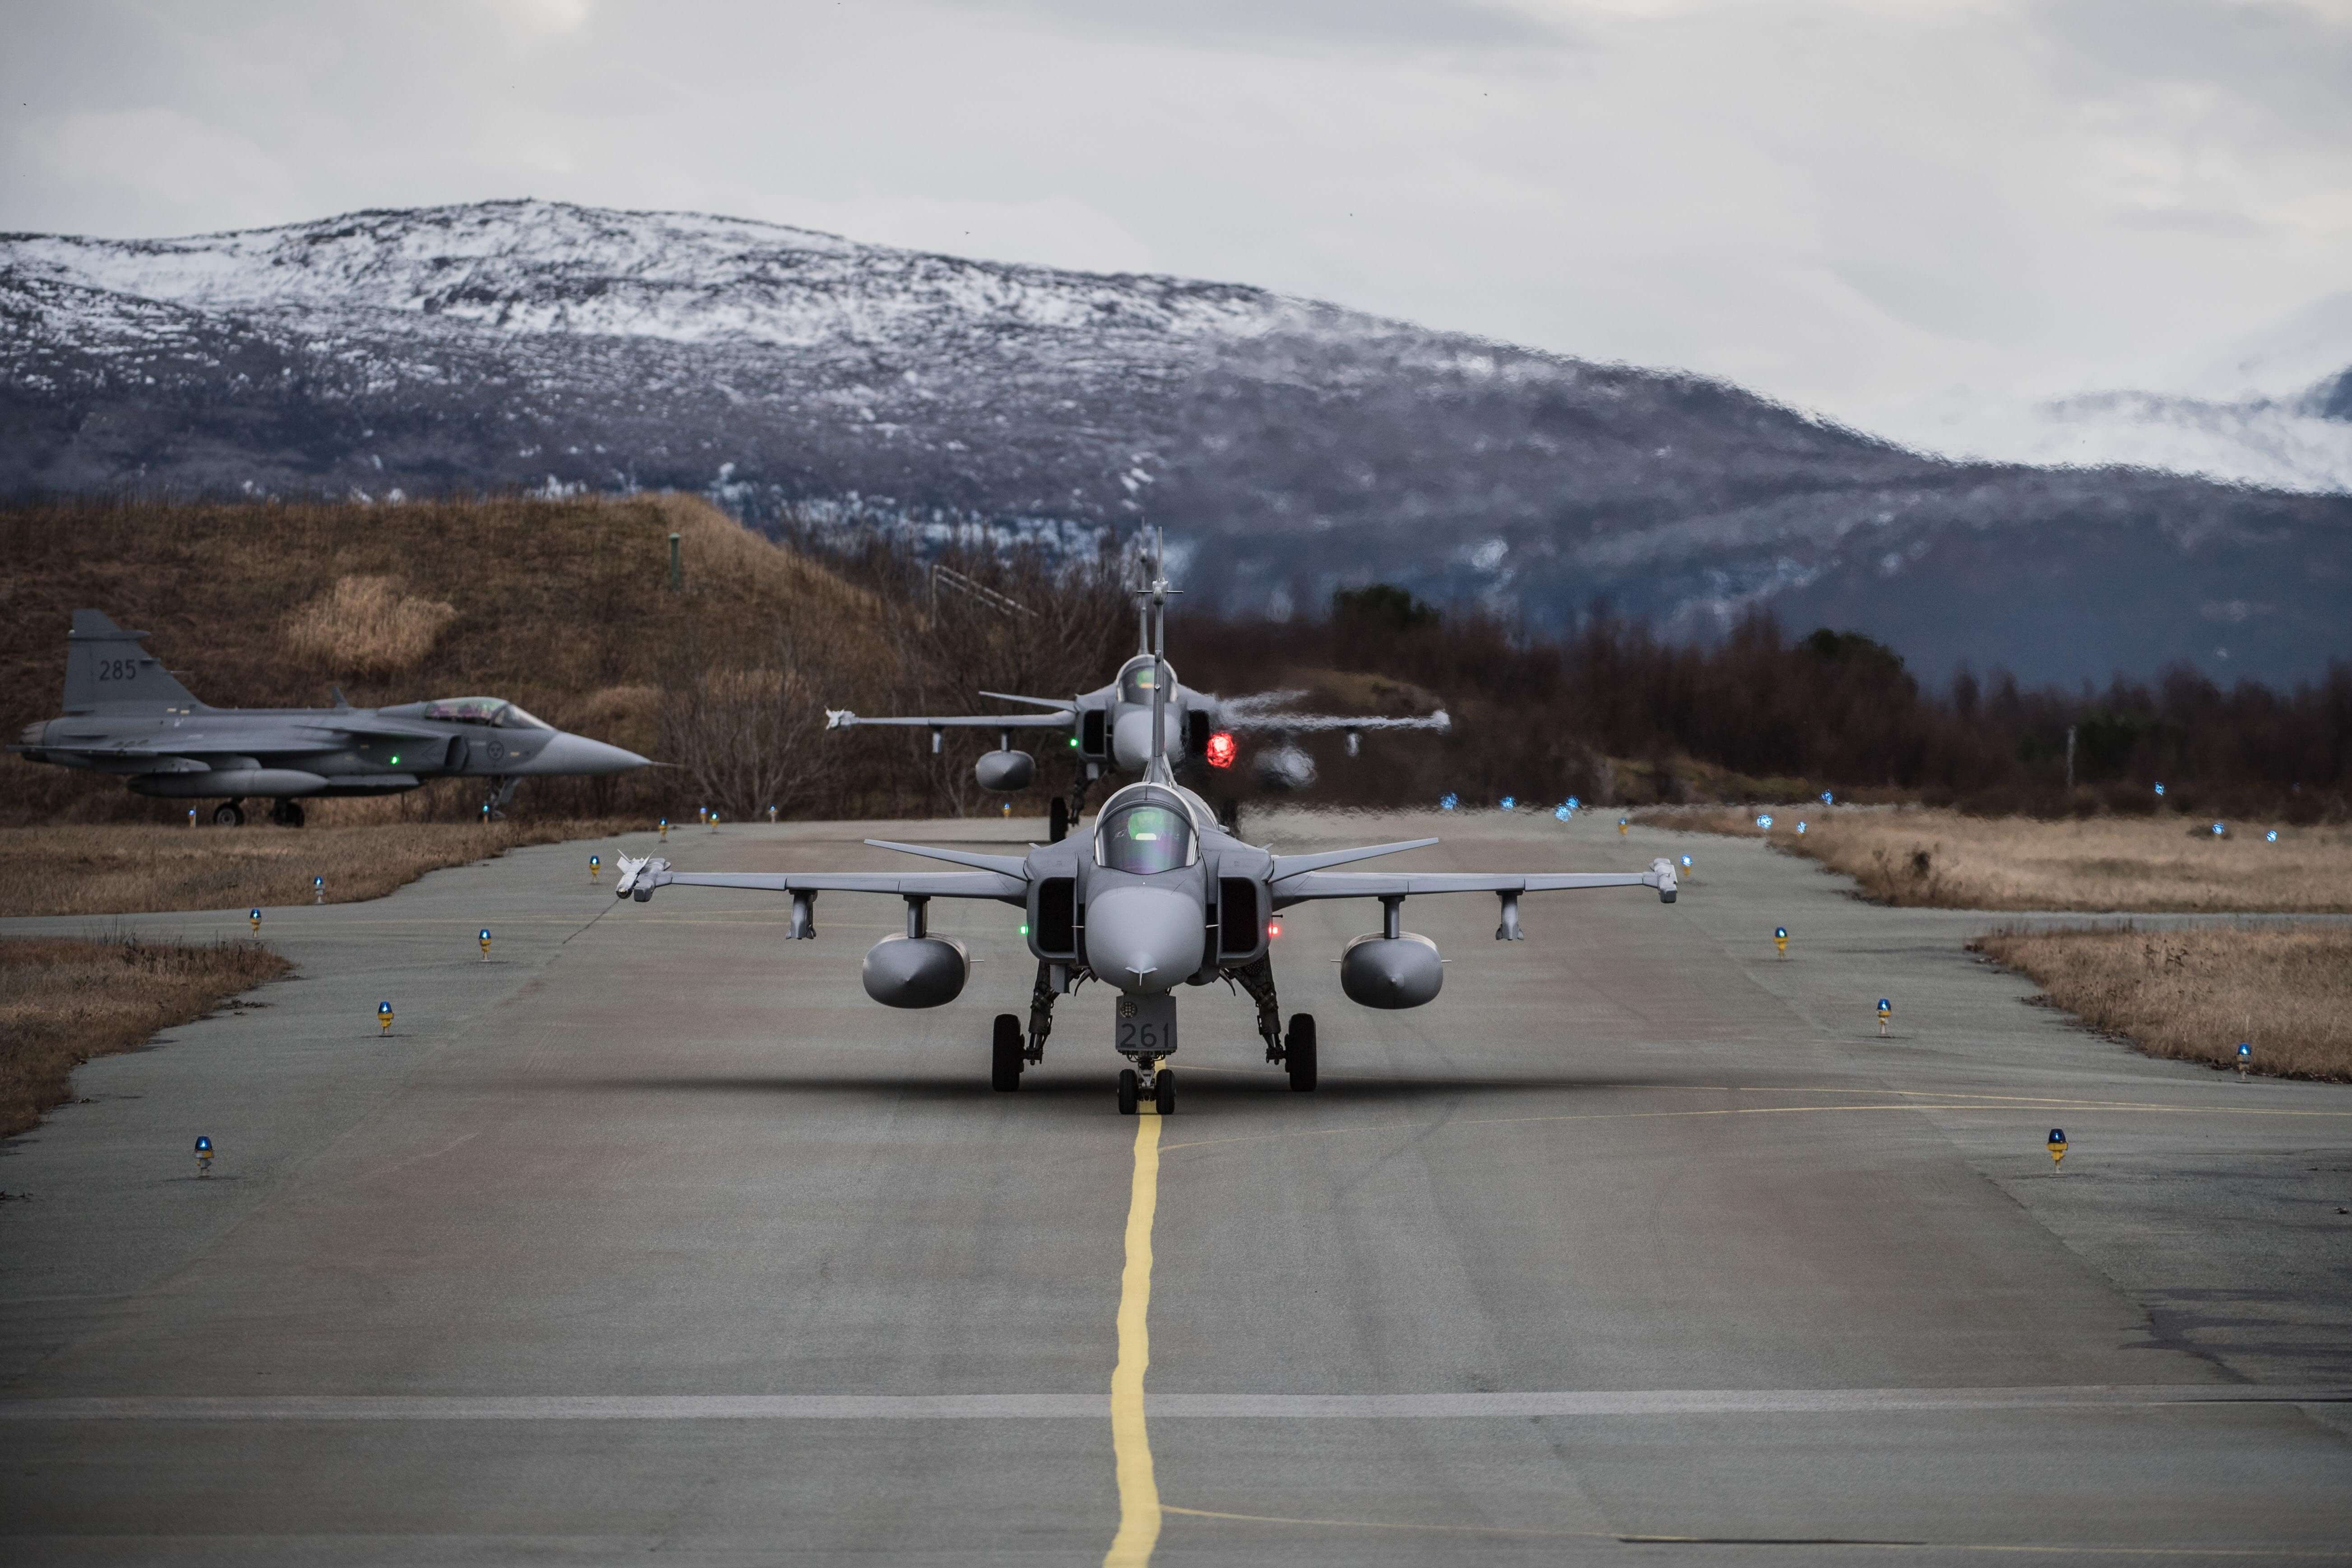 Swedish JAS 39 Gripens before take off during exercise Trident Juncture. © NATO North Atlantic Treaty Organization/Flickr